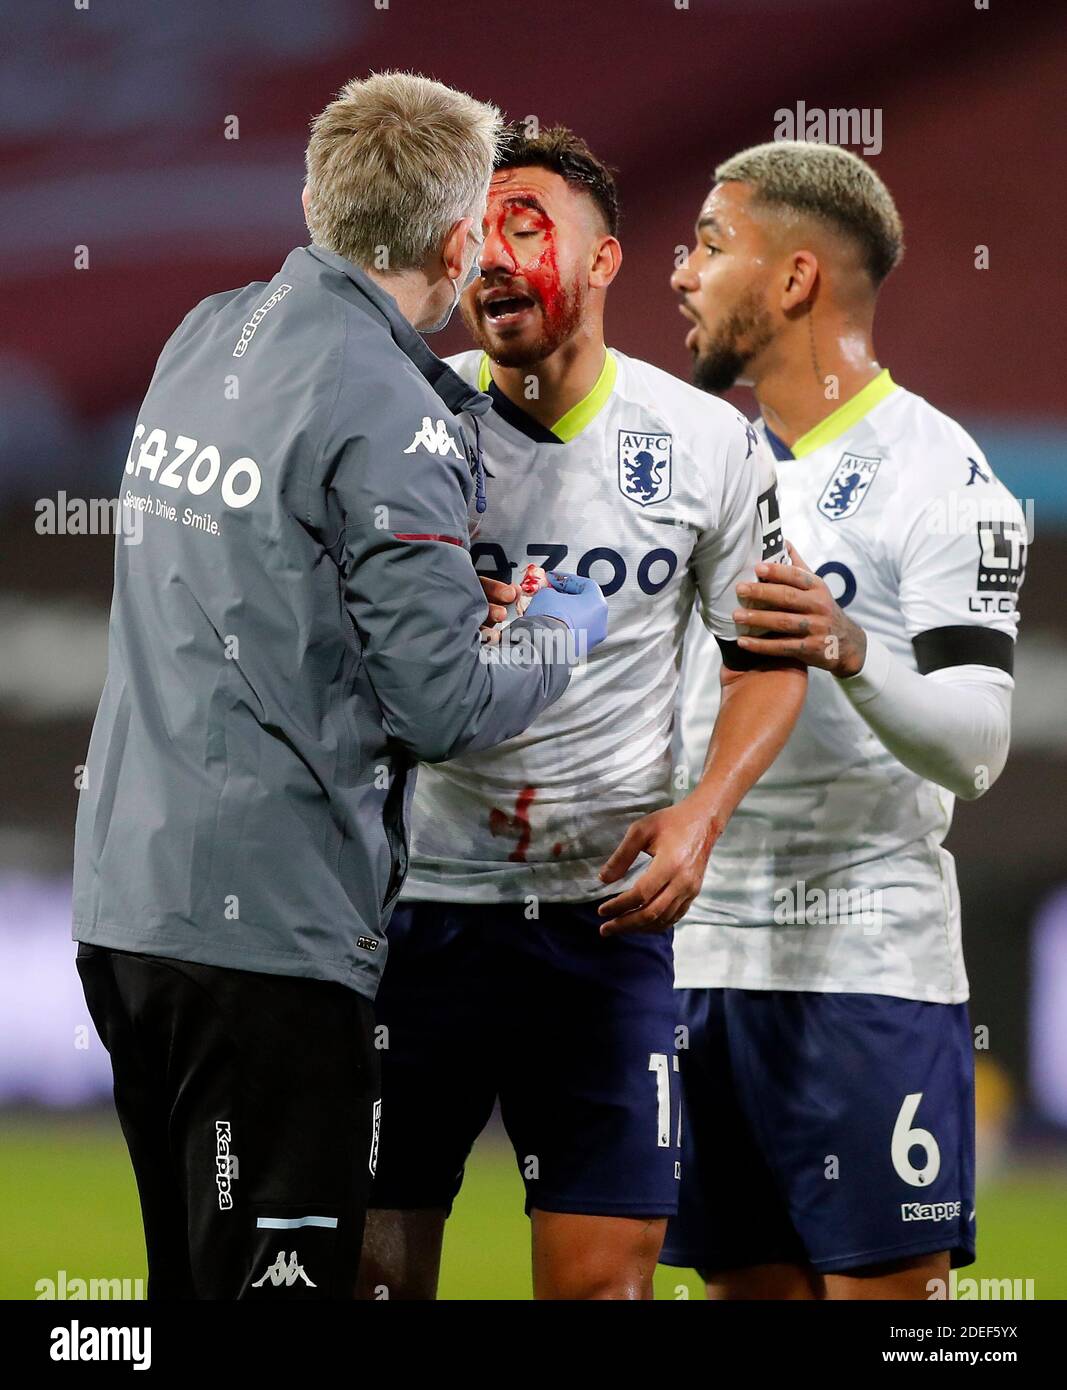 Aston Villas Trezeguet is covered in blood after a collision which results in him winning a penalty during the Premier League match at the London Stadium, London Stock Photo